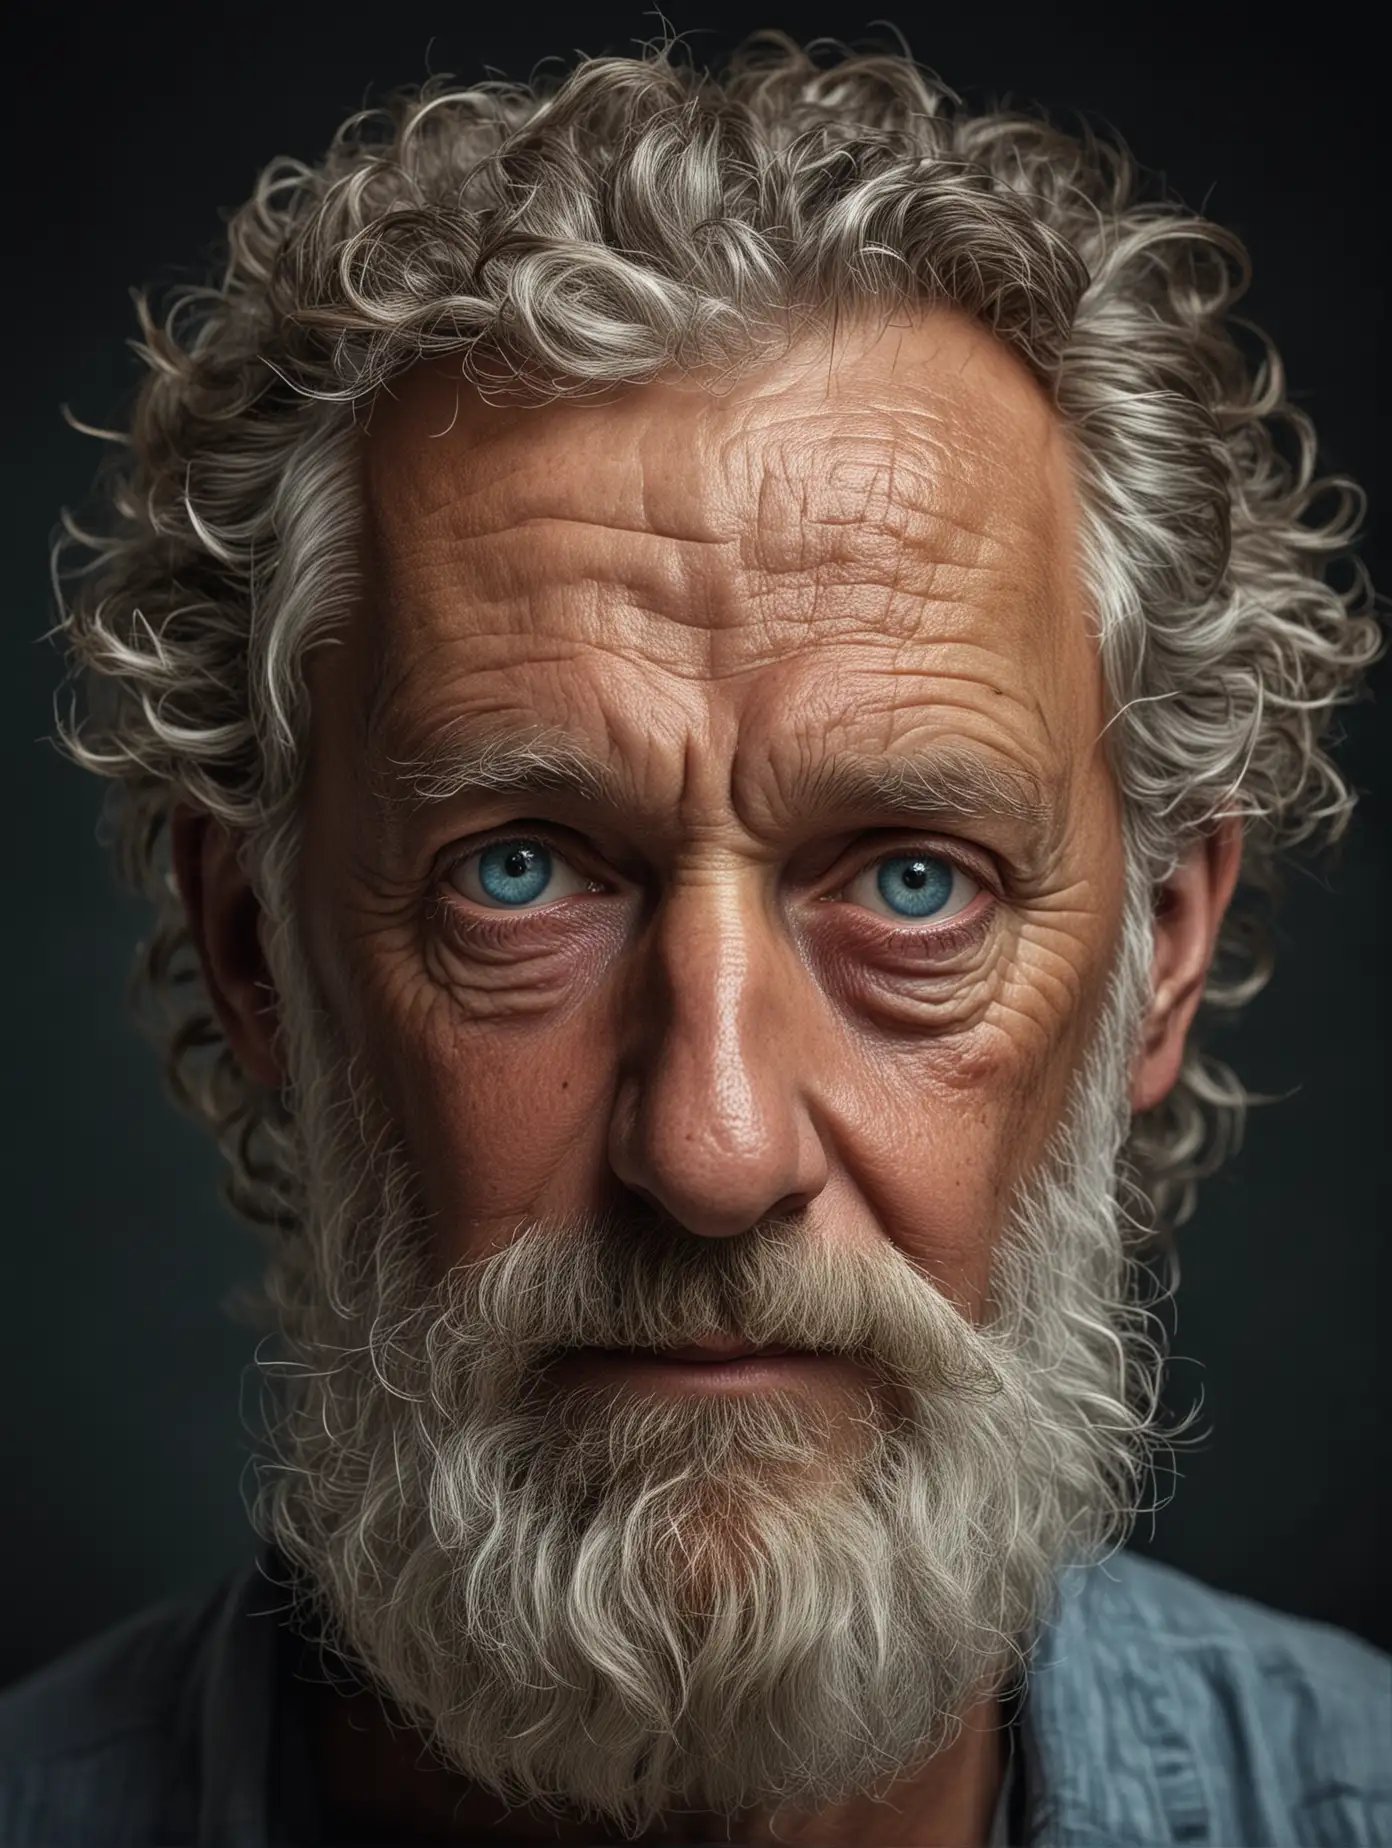 Realistic Portrait of a Weathered Elderly Man with Curly Facial Hair